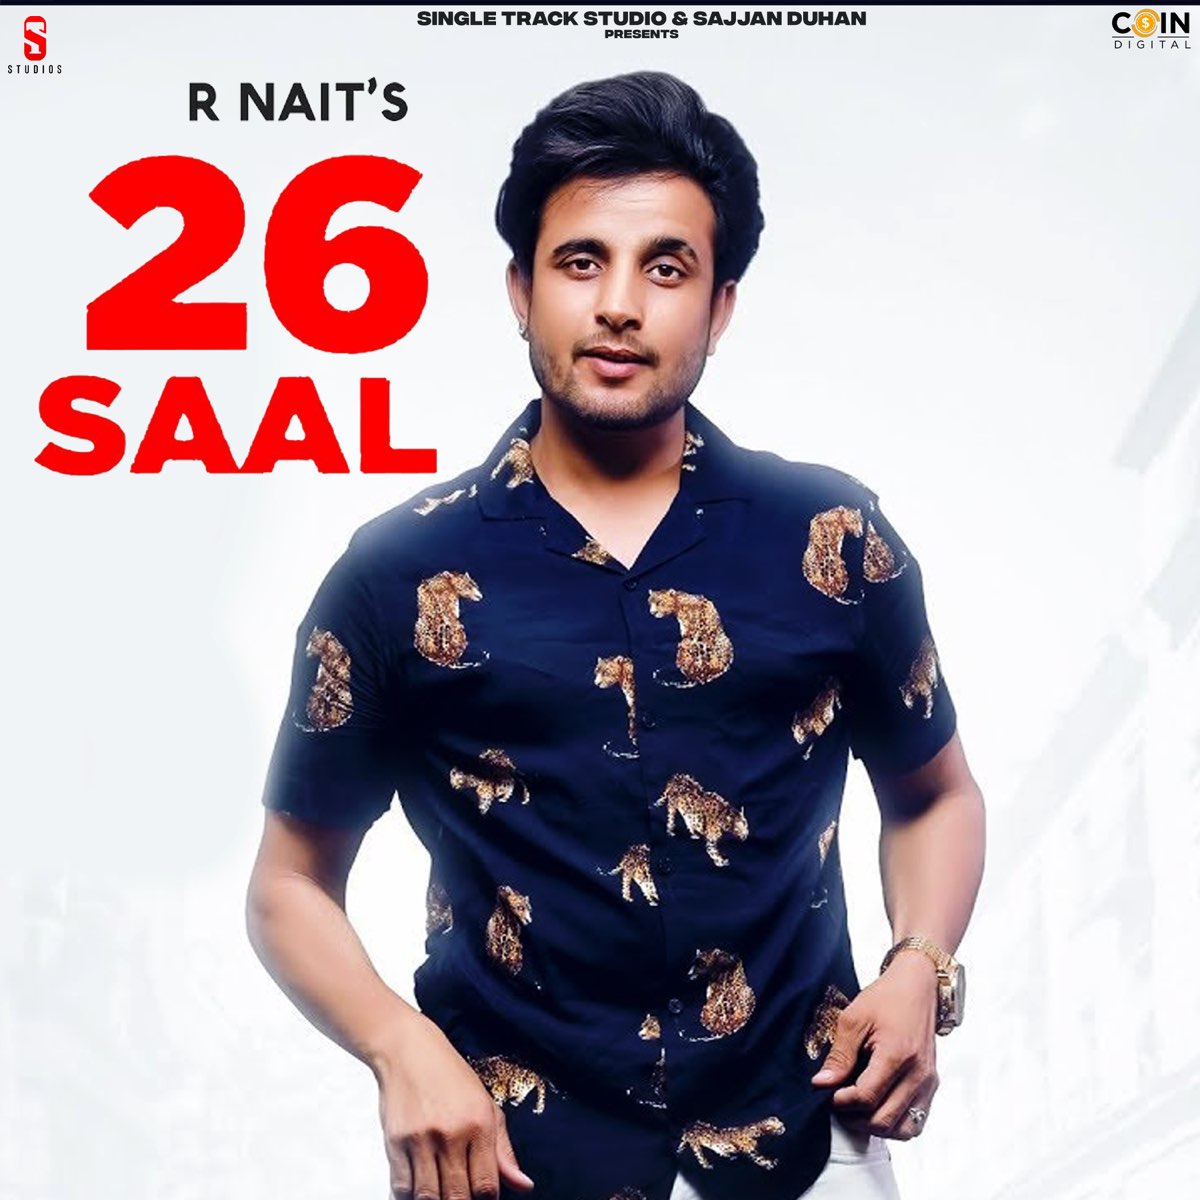 26 saal r nait mp3 song download